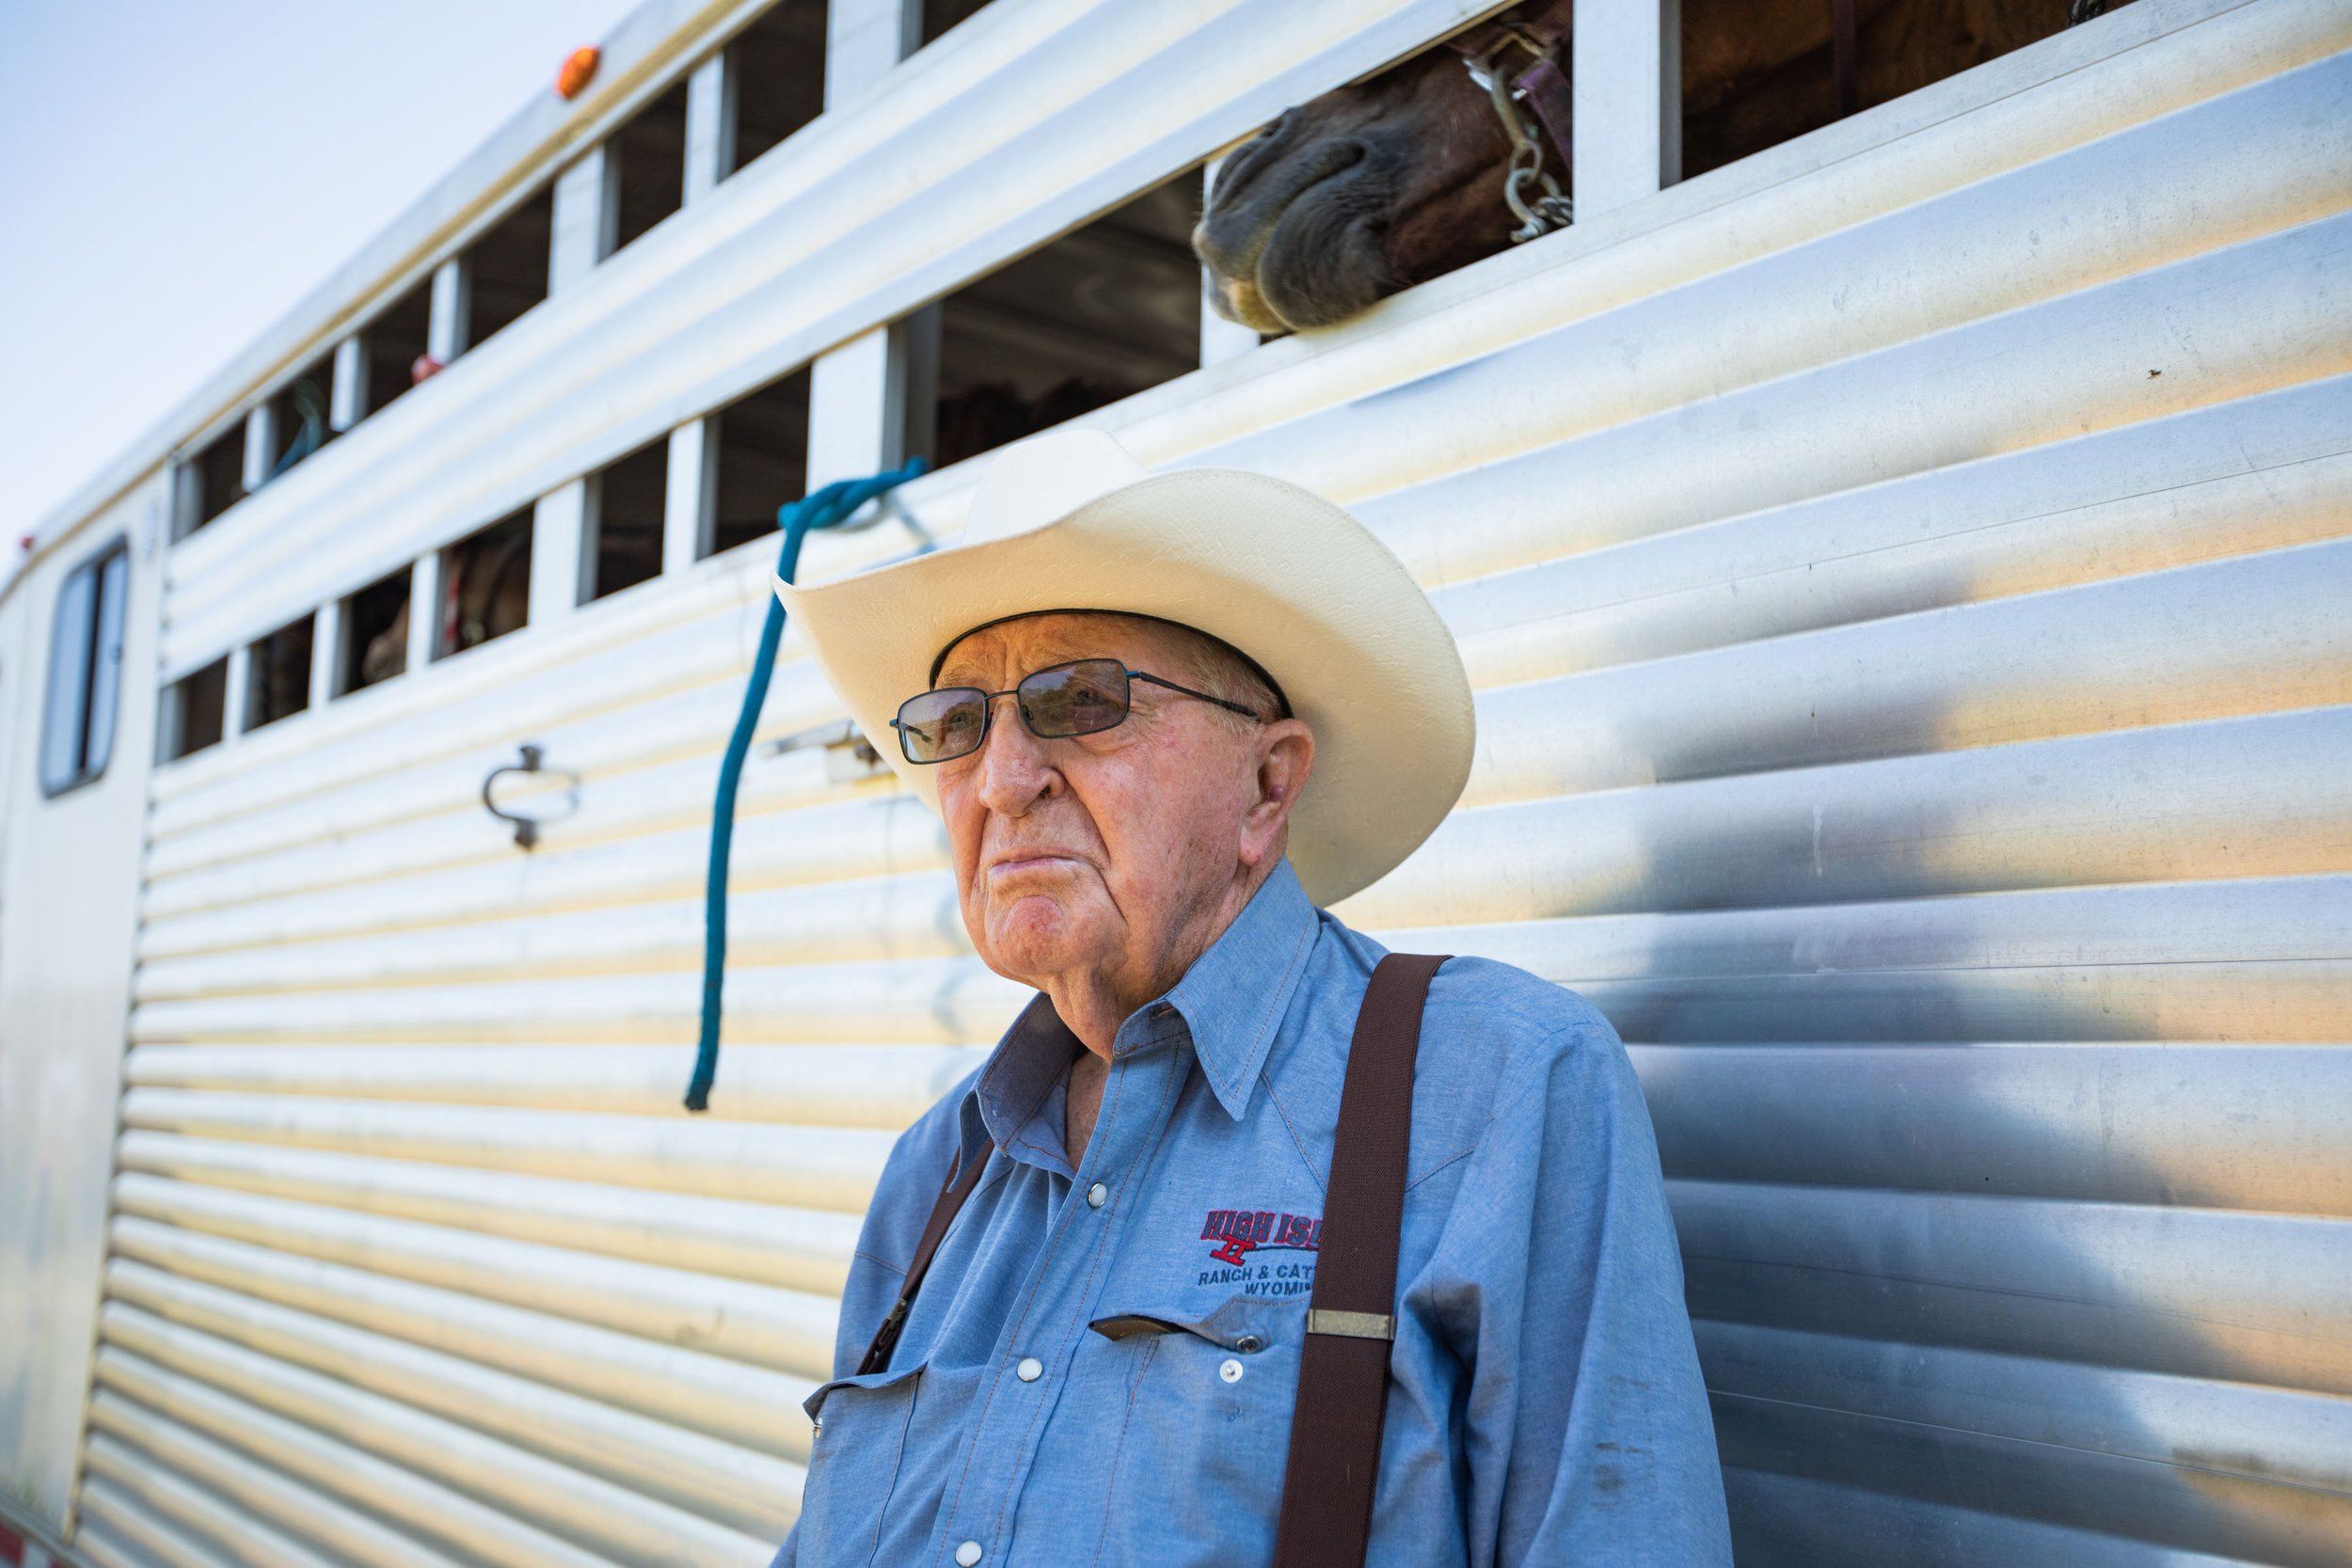  90-year-old Jack Brittingham, the oldest Saltwater Cowboy in the Chincoteague Volunteer Fire Company, poses for a portrait after rounding up ponies during the North Herd Roundup on the north end of Assateague Island, Virginia on Sunday, July 23, 202